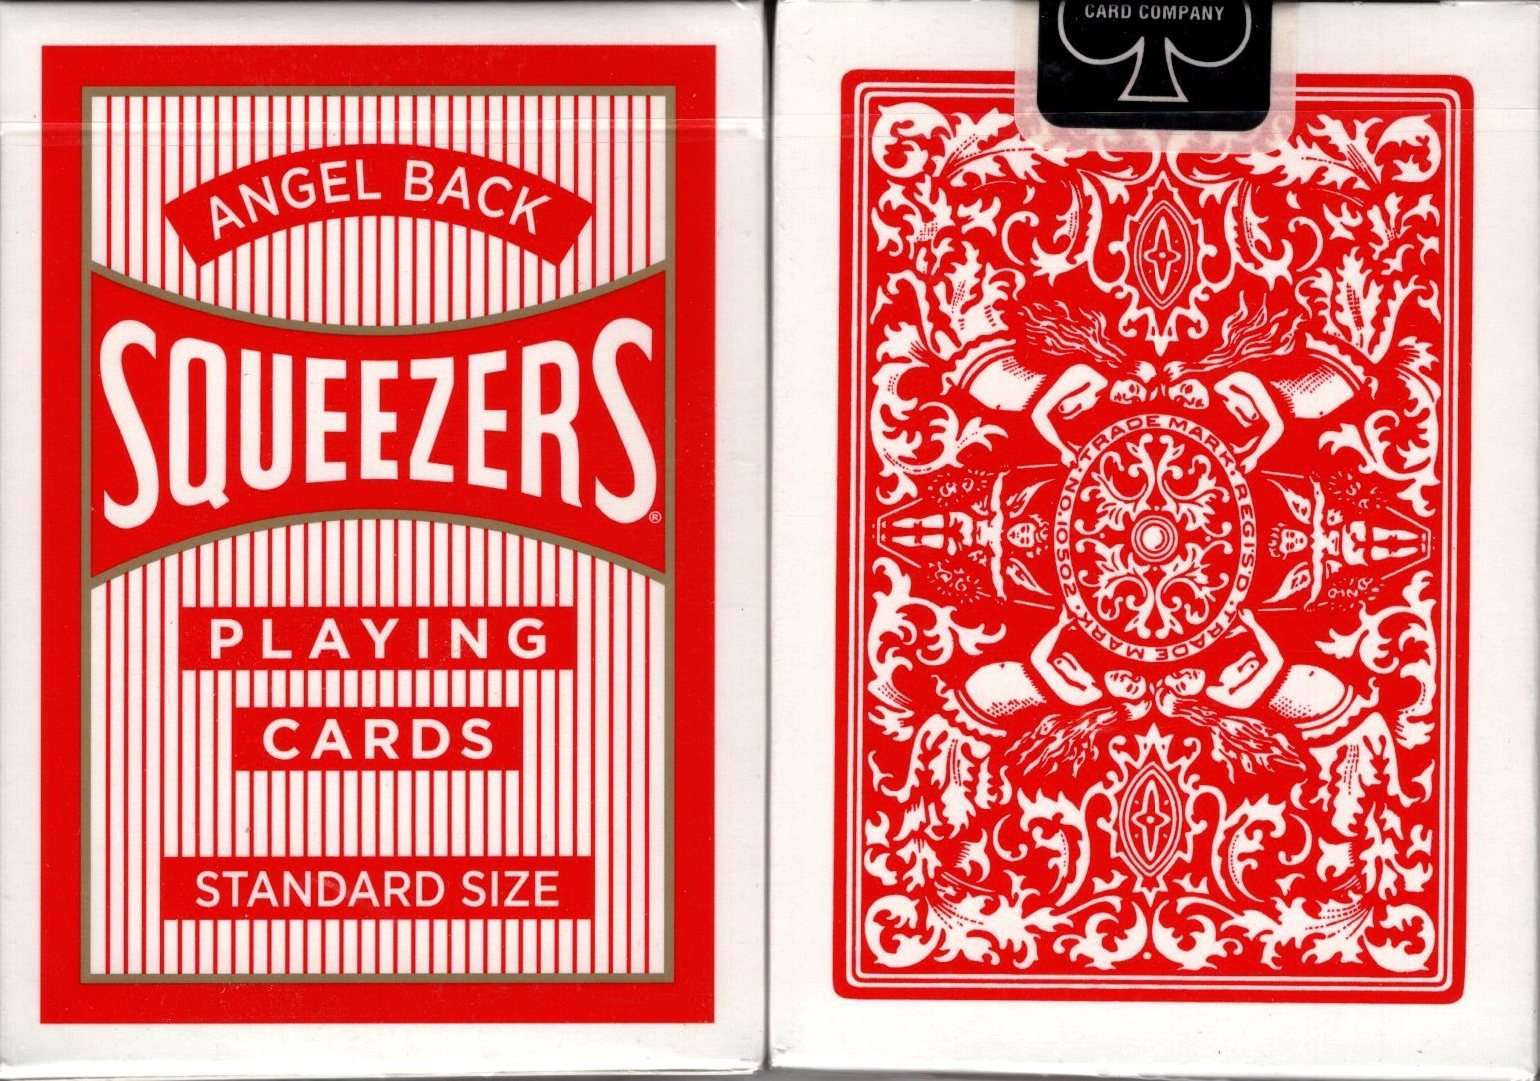 PlayingCardDecks.com-Angel Back Squeezers Playing Cards USPCC: Red